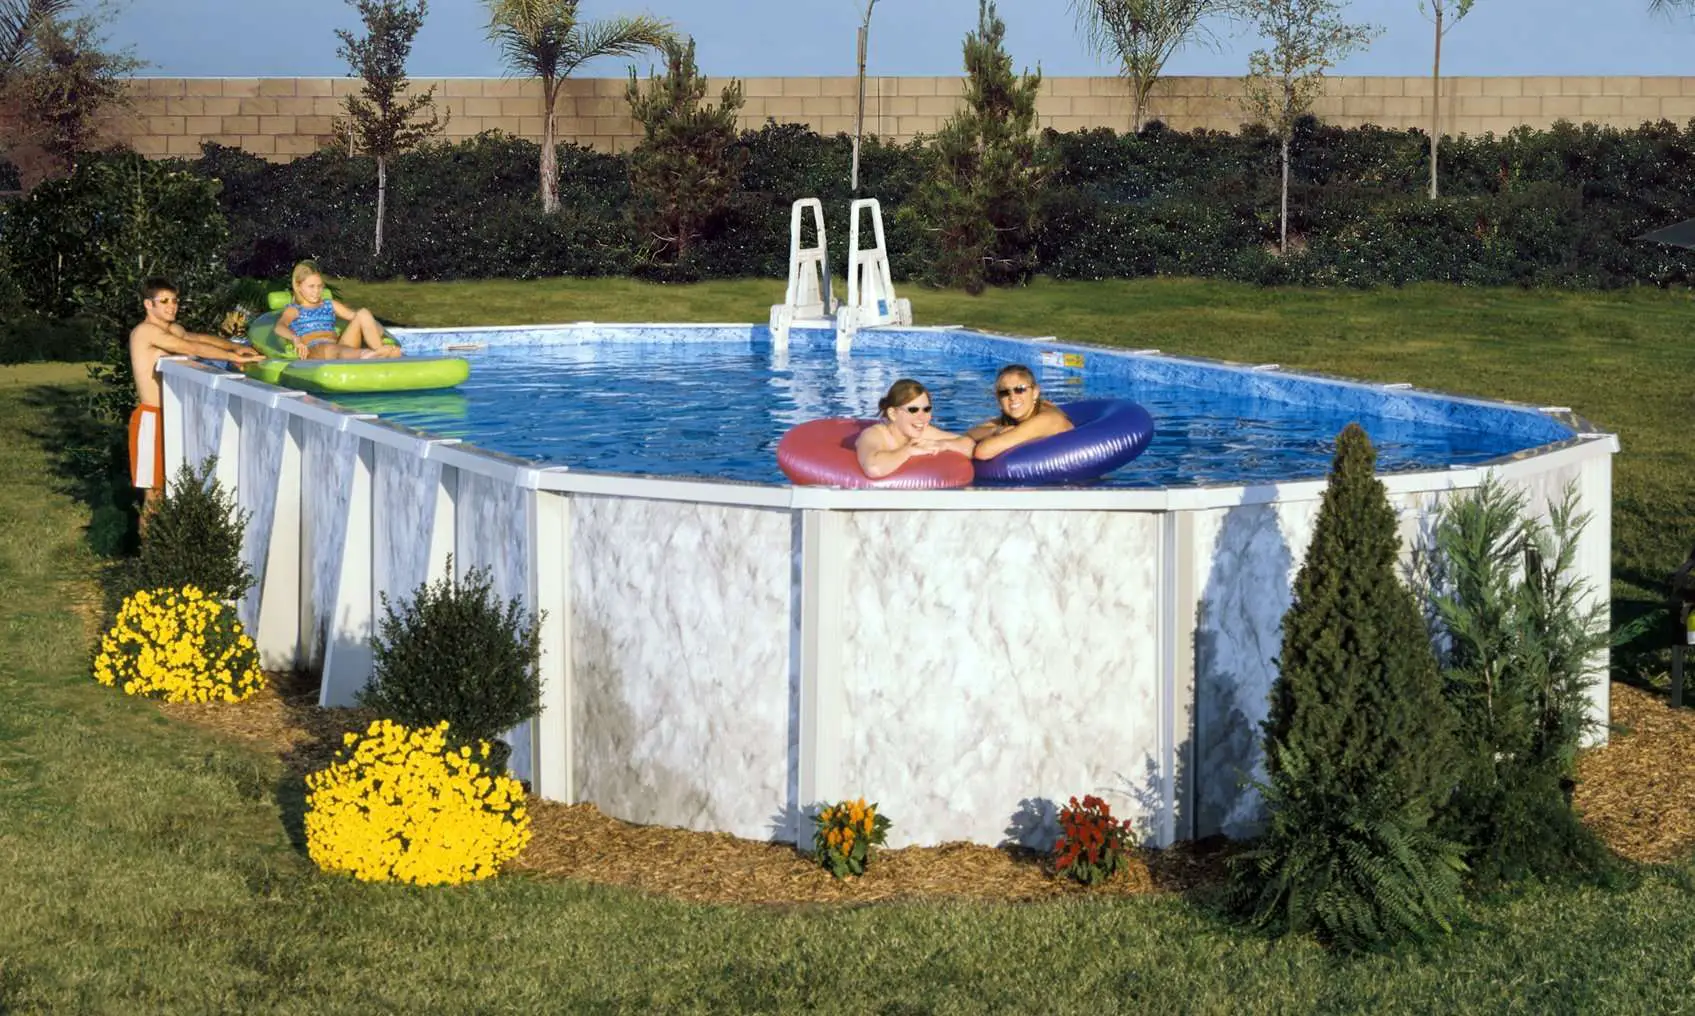 Why Get an Above Ground Pool?